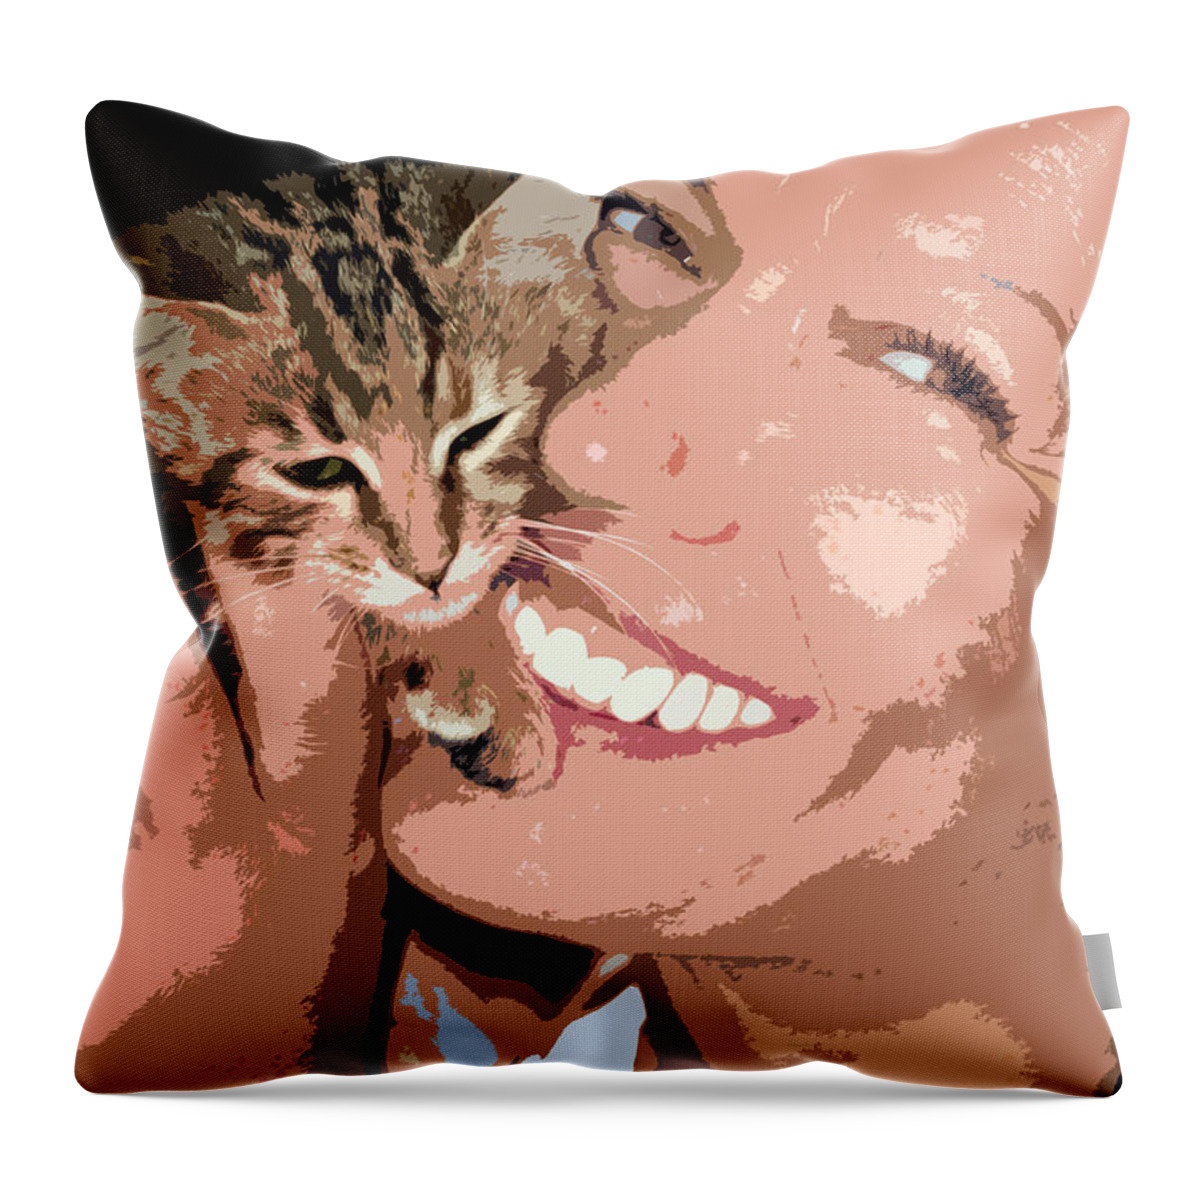 Affection Throw Pillow featuring the photograph Perfect Smile by Stelios Kleanthous